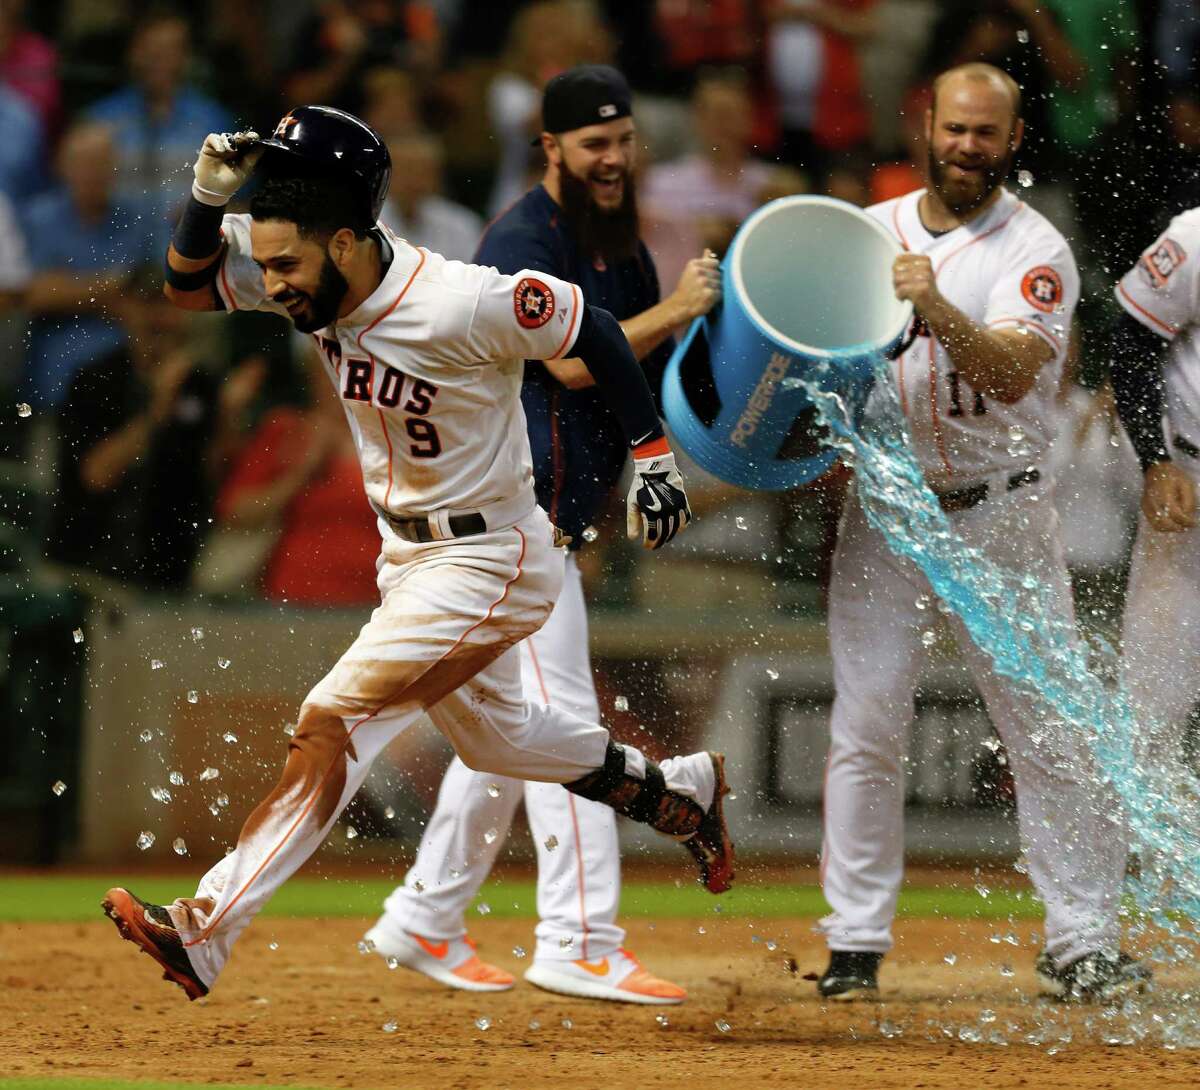 Marwin Gonzalez's walk-off homer gives Astros win over Rays